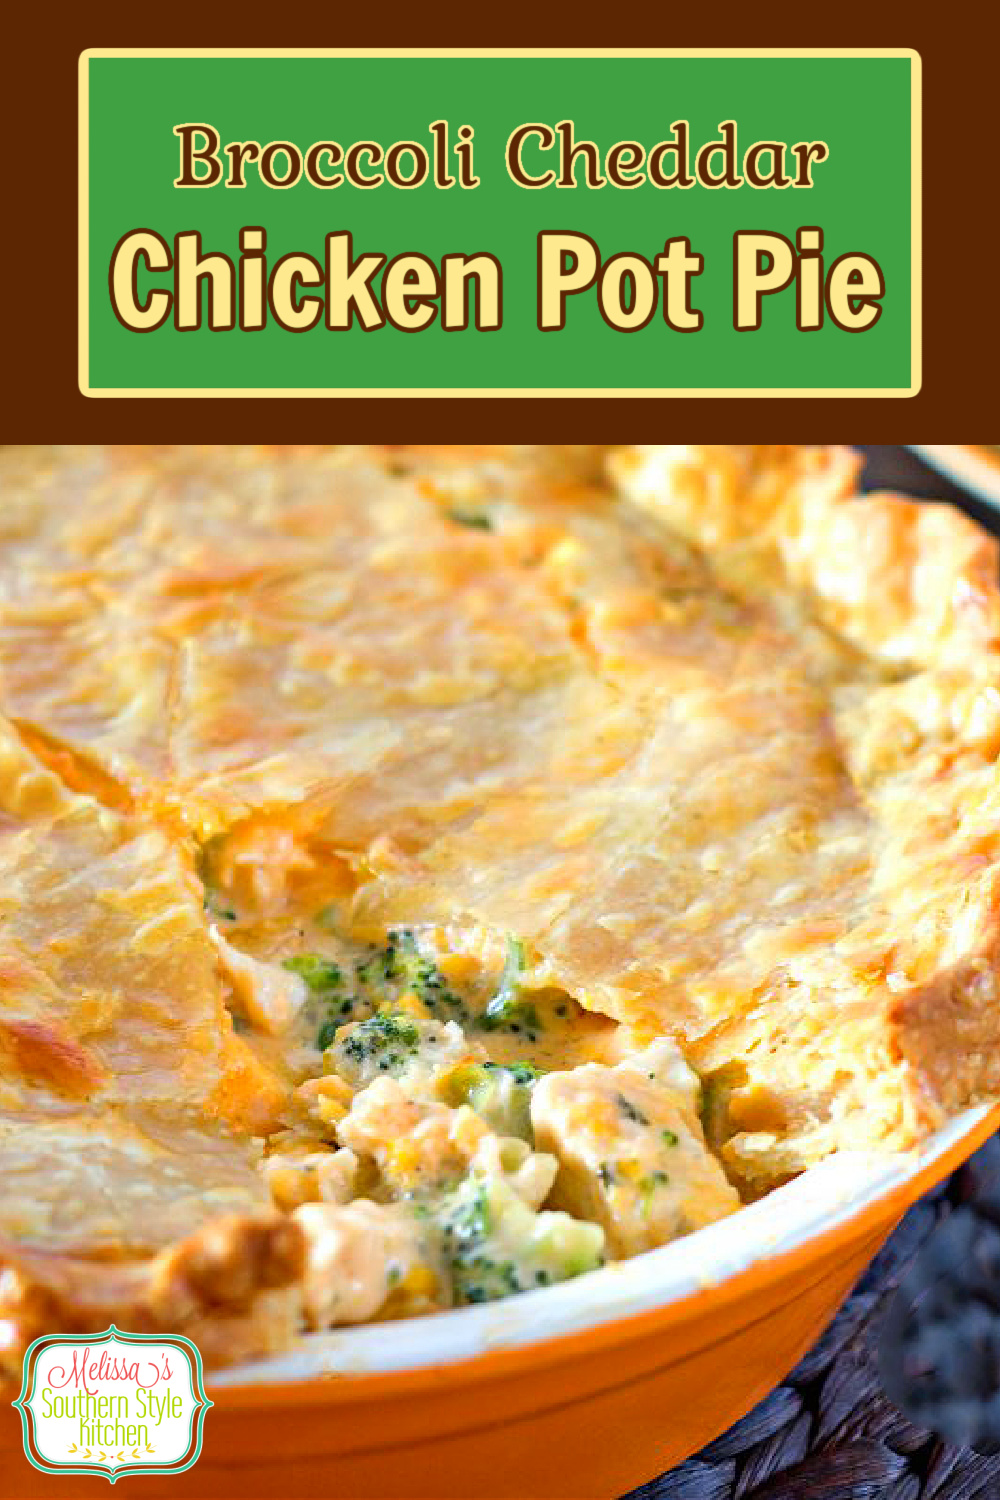 This cheesy Broccoli Cheddar Chicken Pot Pie is a delicious twist on classic chicken pot pie #chickenpotpie #broccolicheddar #easychickenrecipes #chickenrecipes #broccolicheddarchicken #dinner #dinnerideas #southernfood #southernrecipes